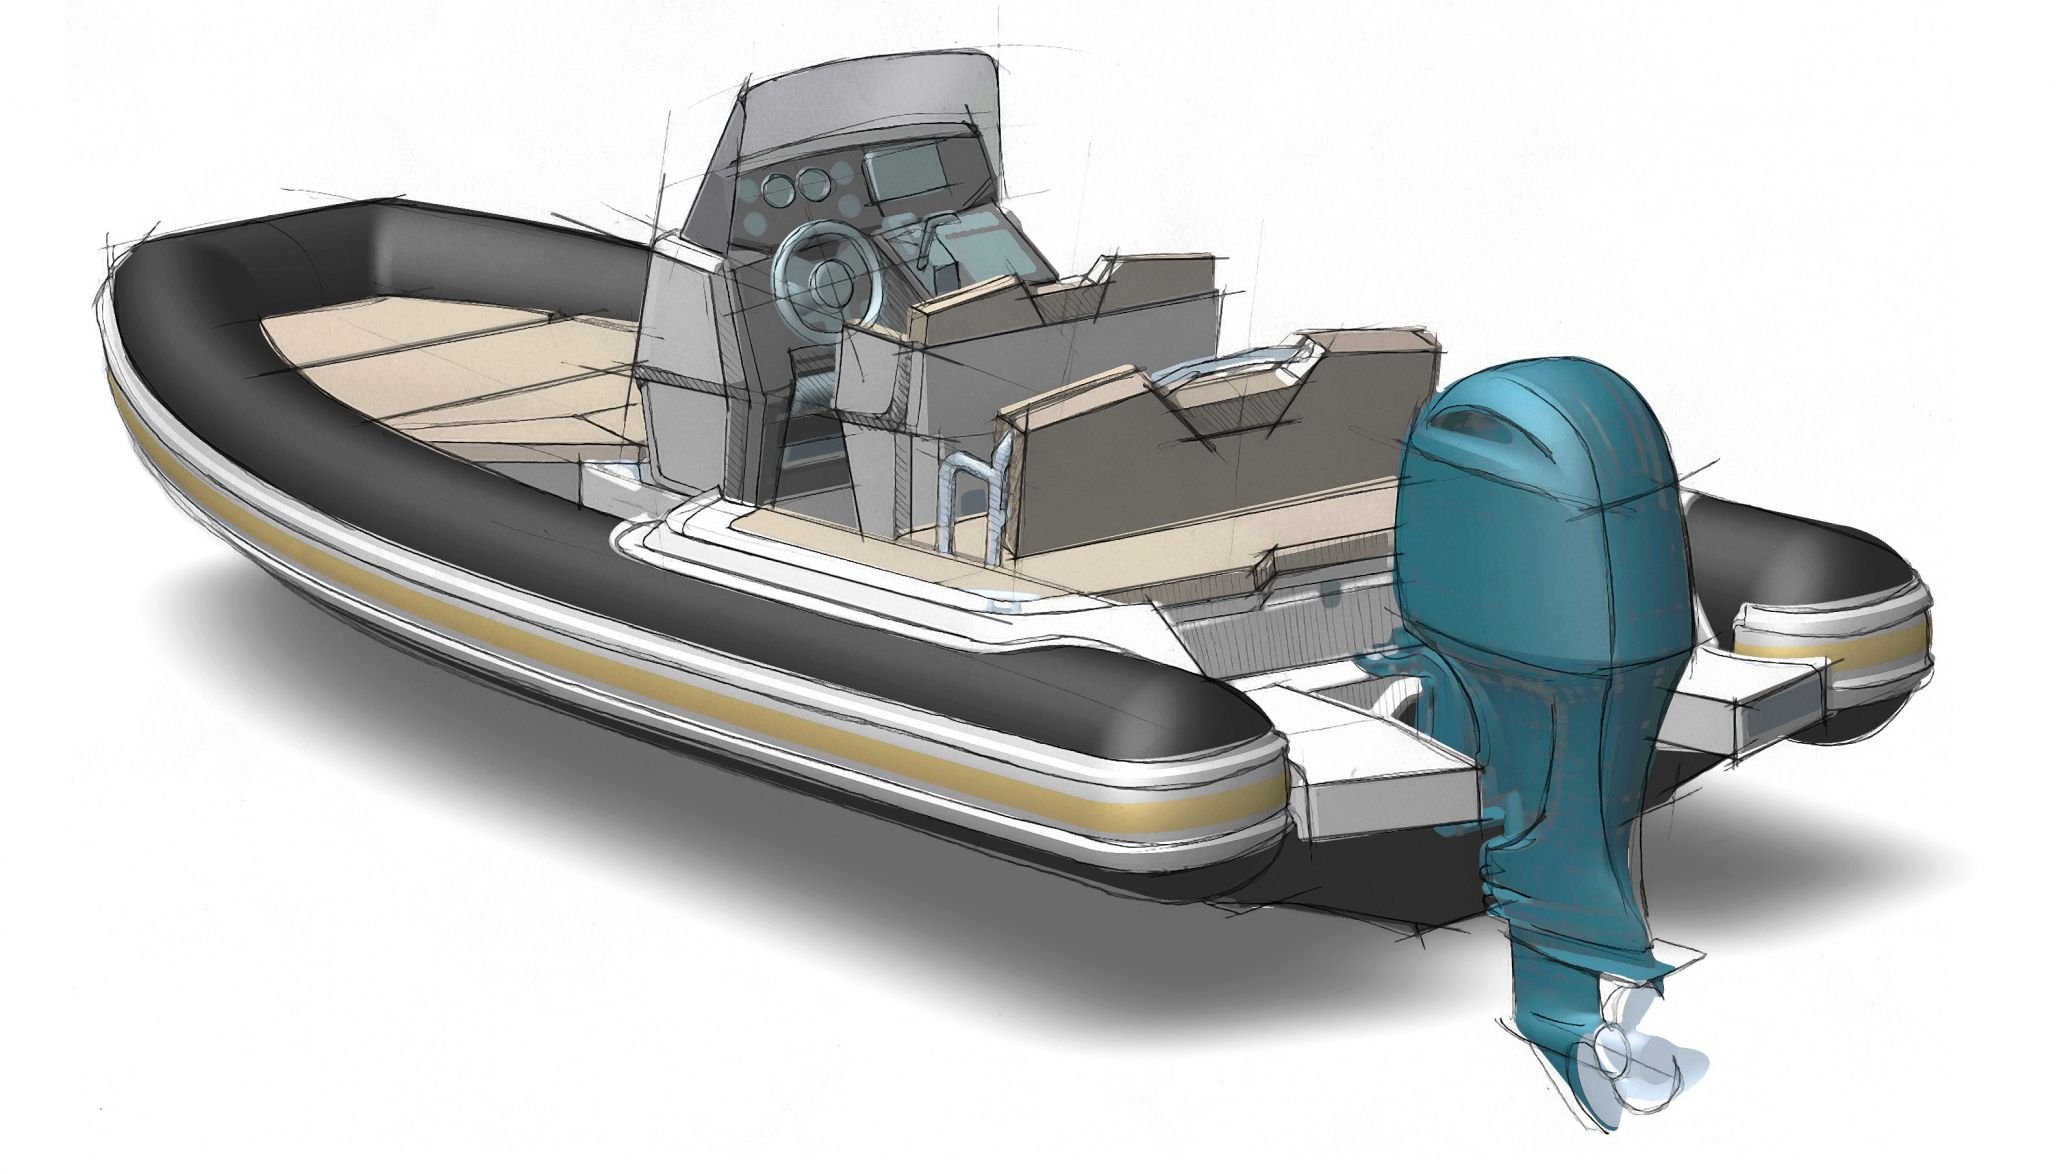 Nautimar Marine - The Joker Boat Coaster 650 Barracuda is the ultimate fishing  RIB. Designed from professional fishermen and purpose-built to fish.  There's no other inflatable boat like it. The proven hull